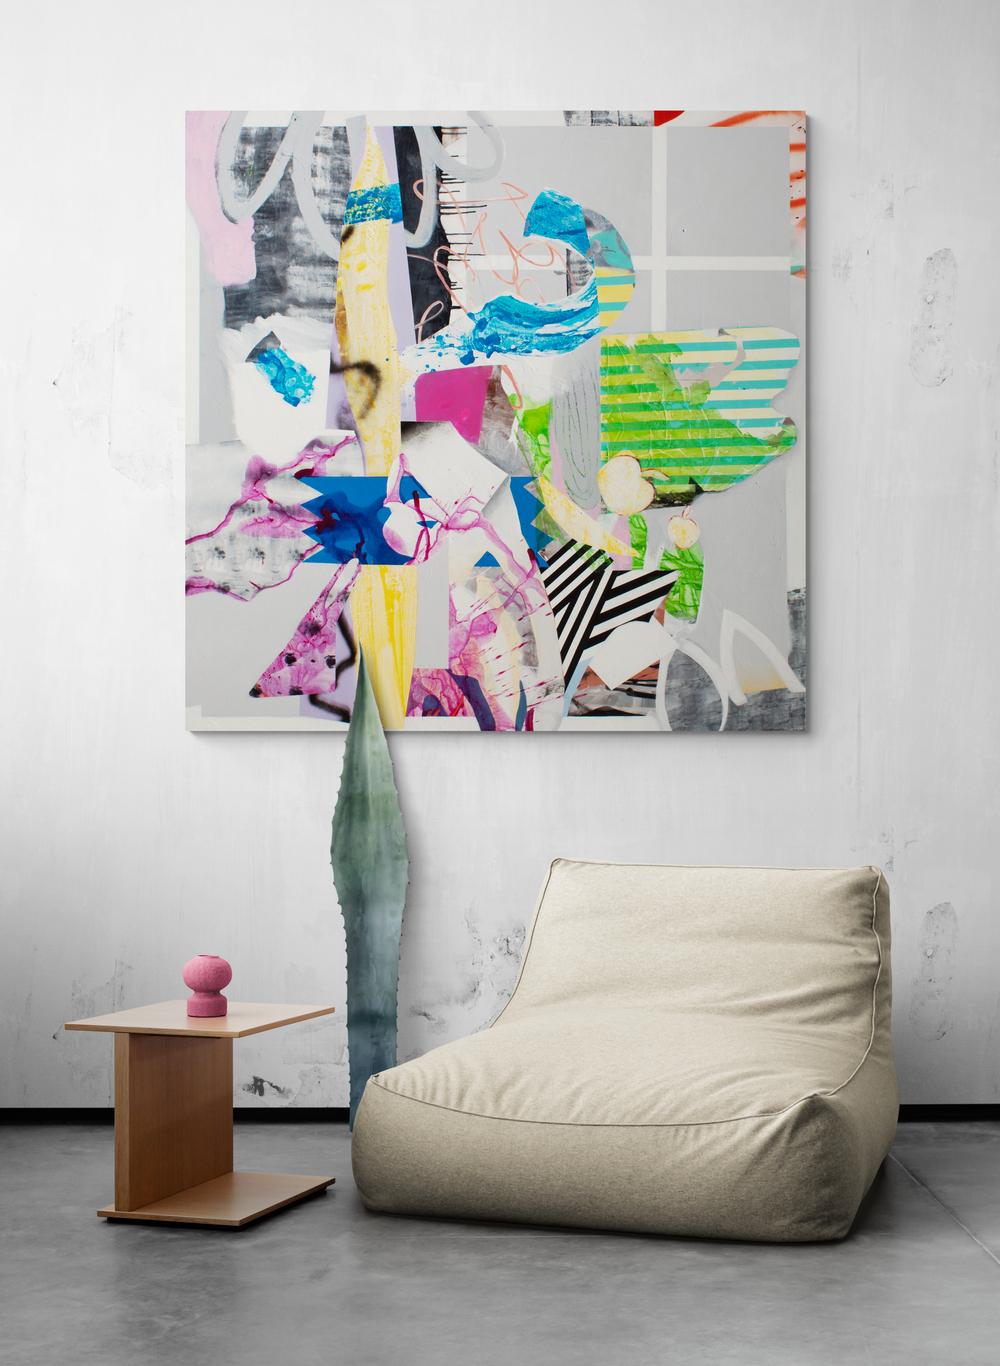 Through integrated and vigorous passages of acrylic that are brushed, sprayed, stenciled and shaped, Ackerman deconstructs the idea of a house interior. This lively and colorful collage composition in cerise, canary, lime green and black is a